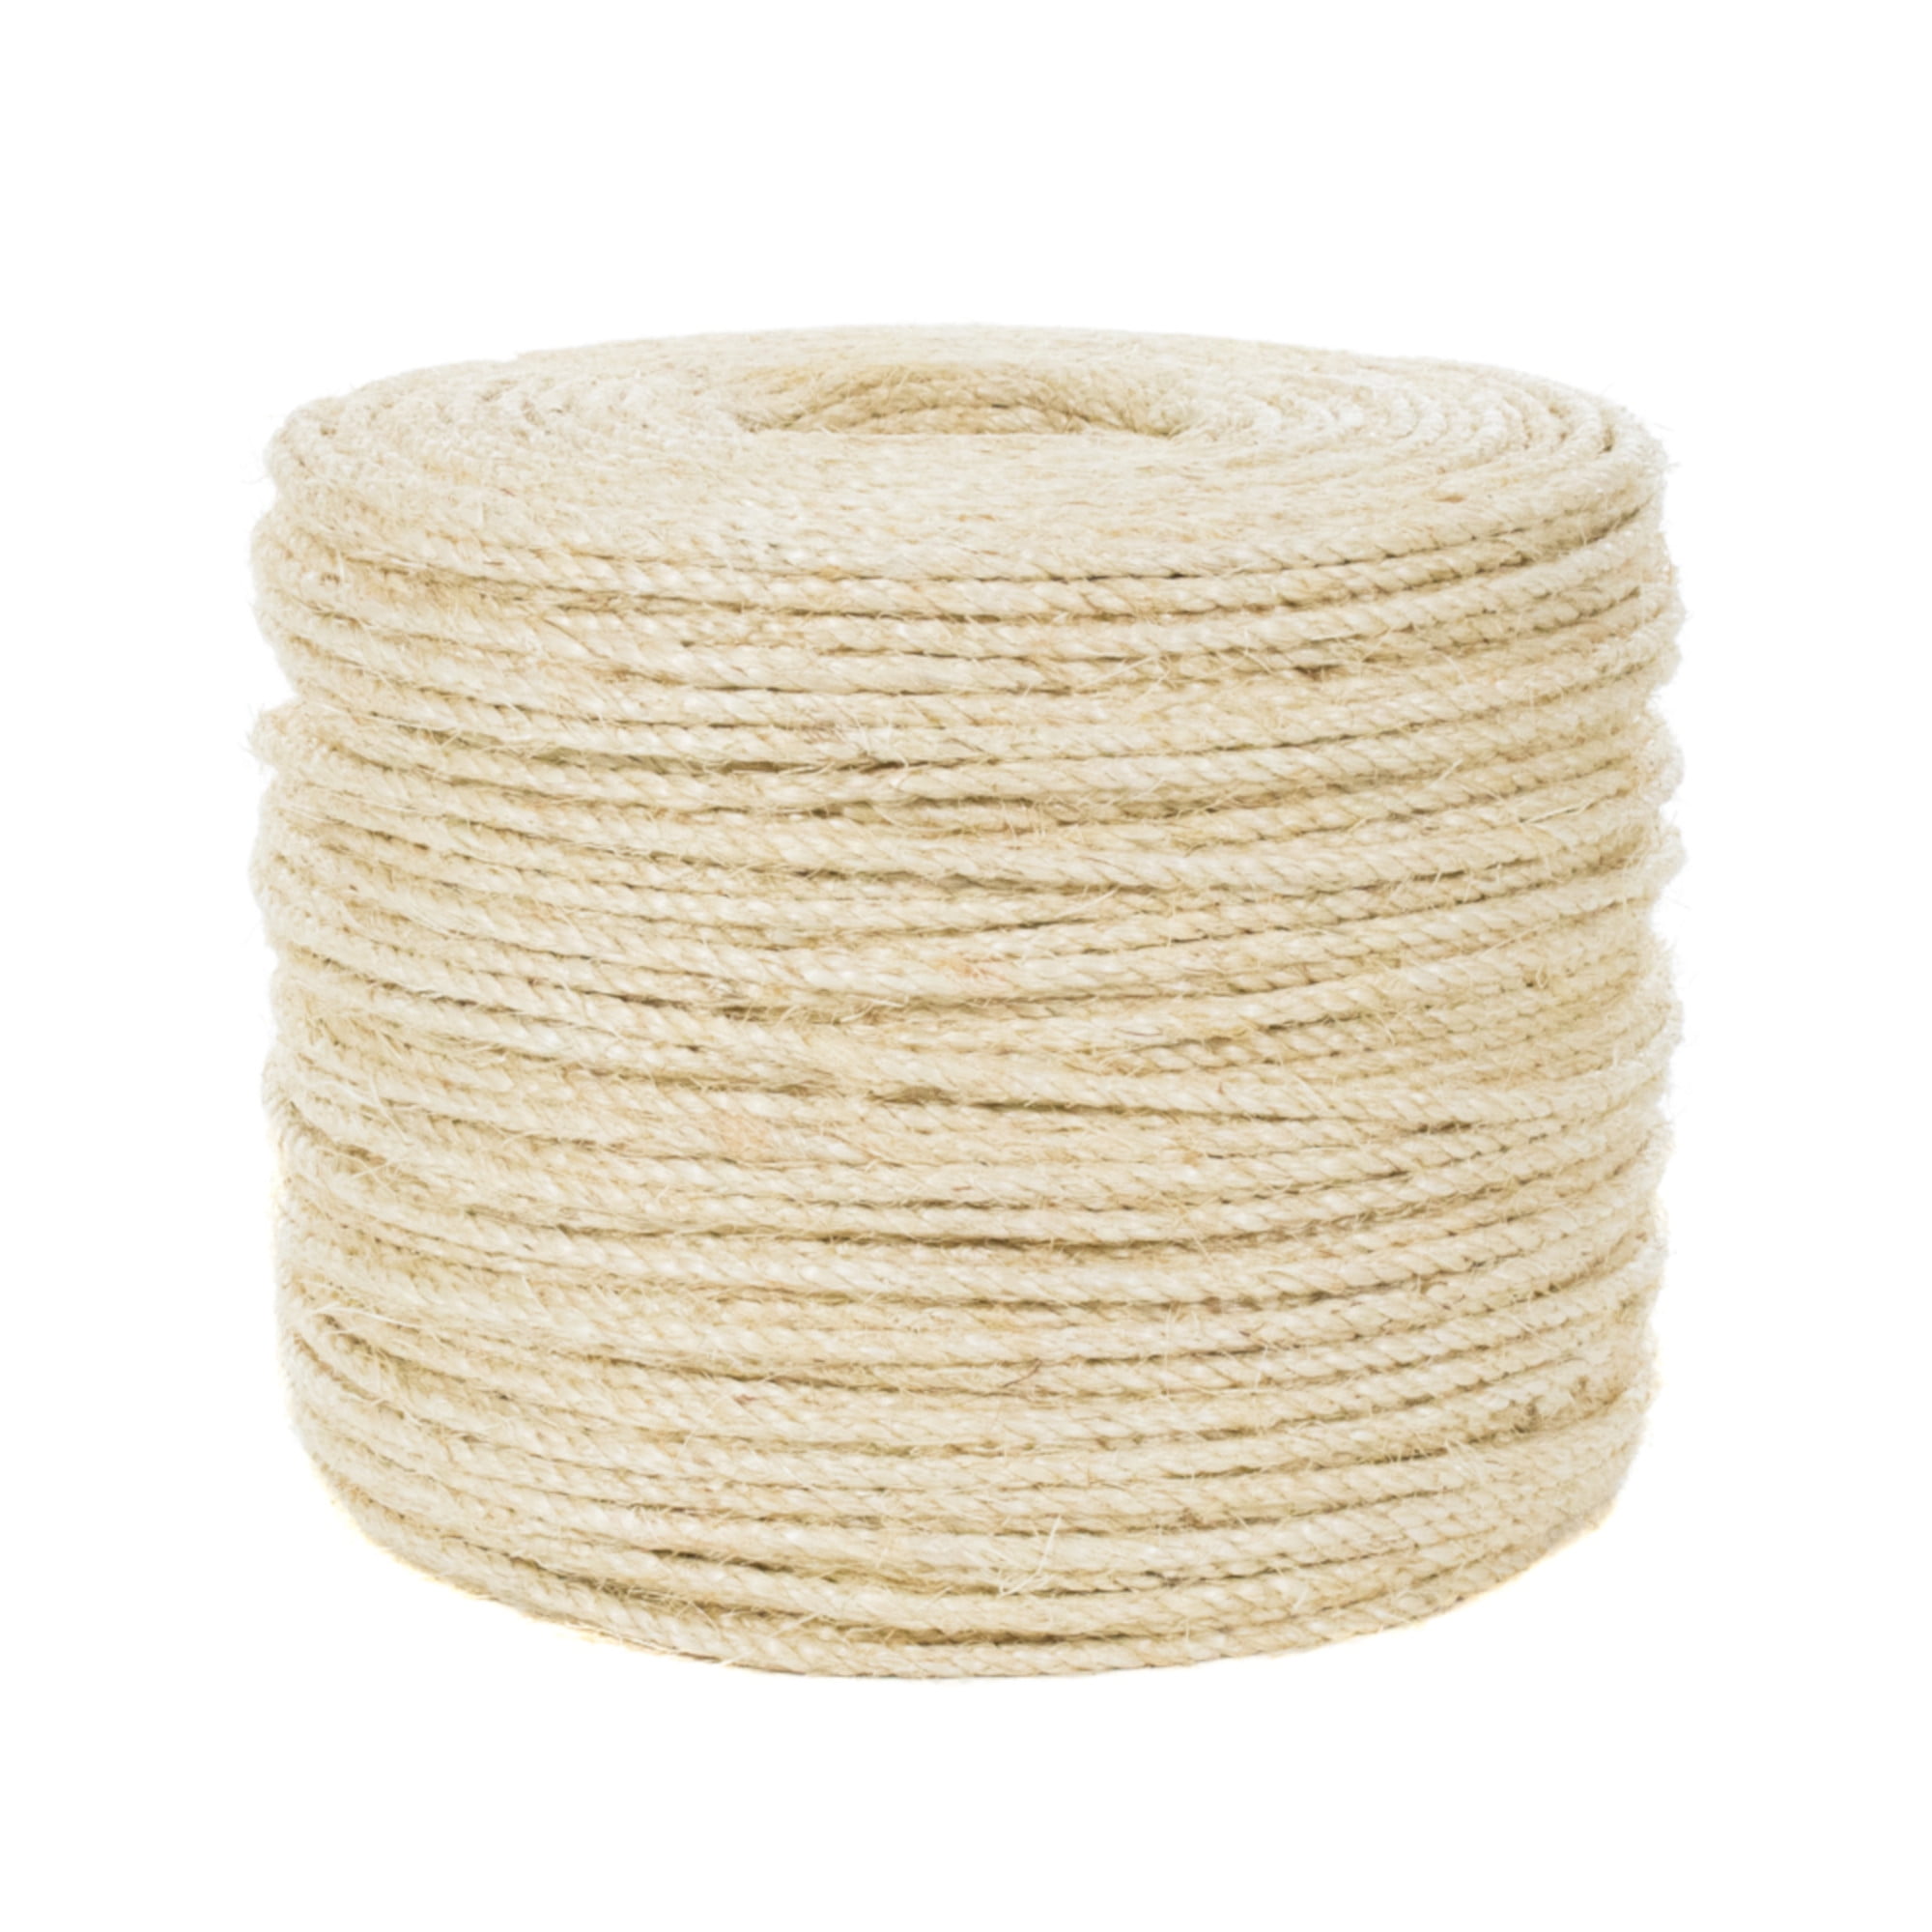 5/16 White Cotton Rope 1 1/4 5/8 1 7/32 3/8 3/4 1/2 3/16 Several Lengths to Choose 1/4 GOLBERG Twisted 100% Natural Cotton Rope 5/32 1 1/2 